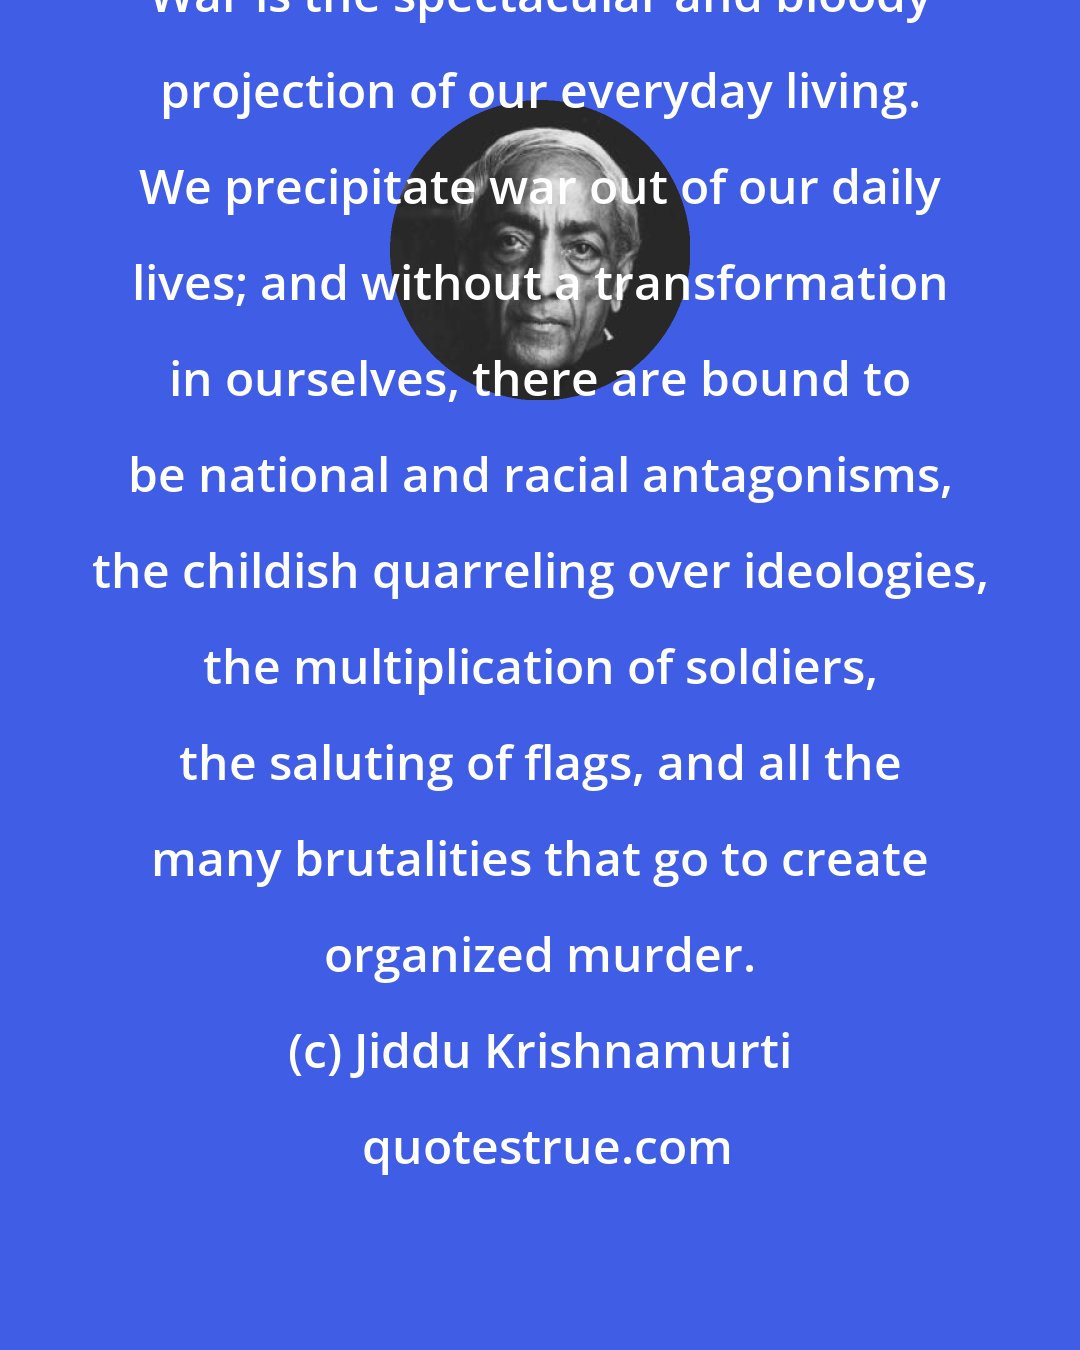 Jiddu Krishnamurti: War is the spectacular and bloody projection of our everyday living. We precipitate war out of our daily lives; and without a transformation in ourselves, there are bound to be national and racial antagonisms, the childish quarreling over ideologies, the multiplication of soldiers, the saluting of flags, and all the many brutalities that go to create organized murder.